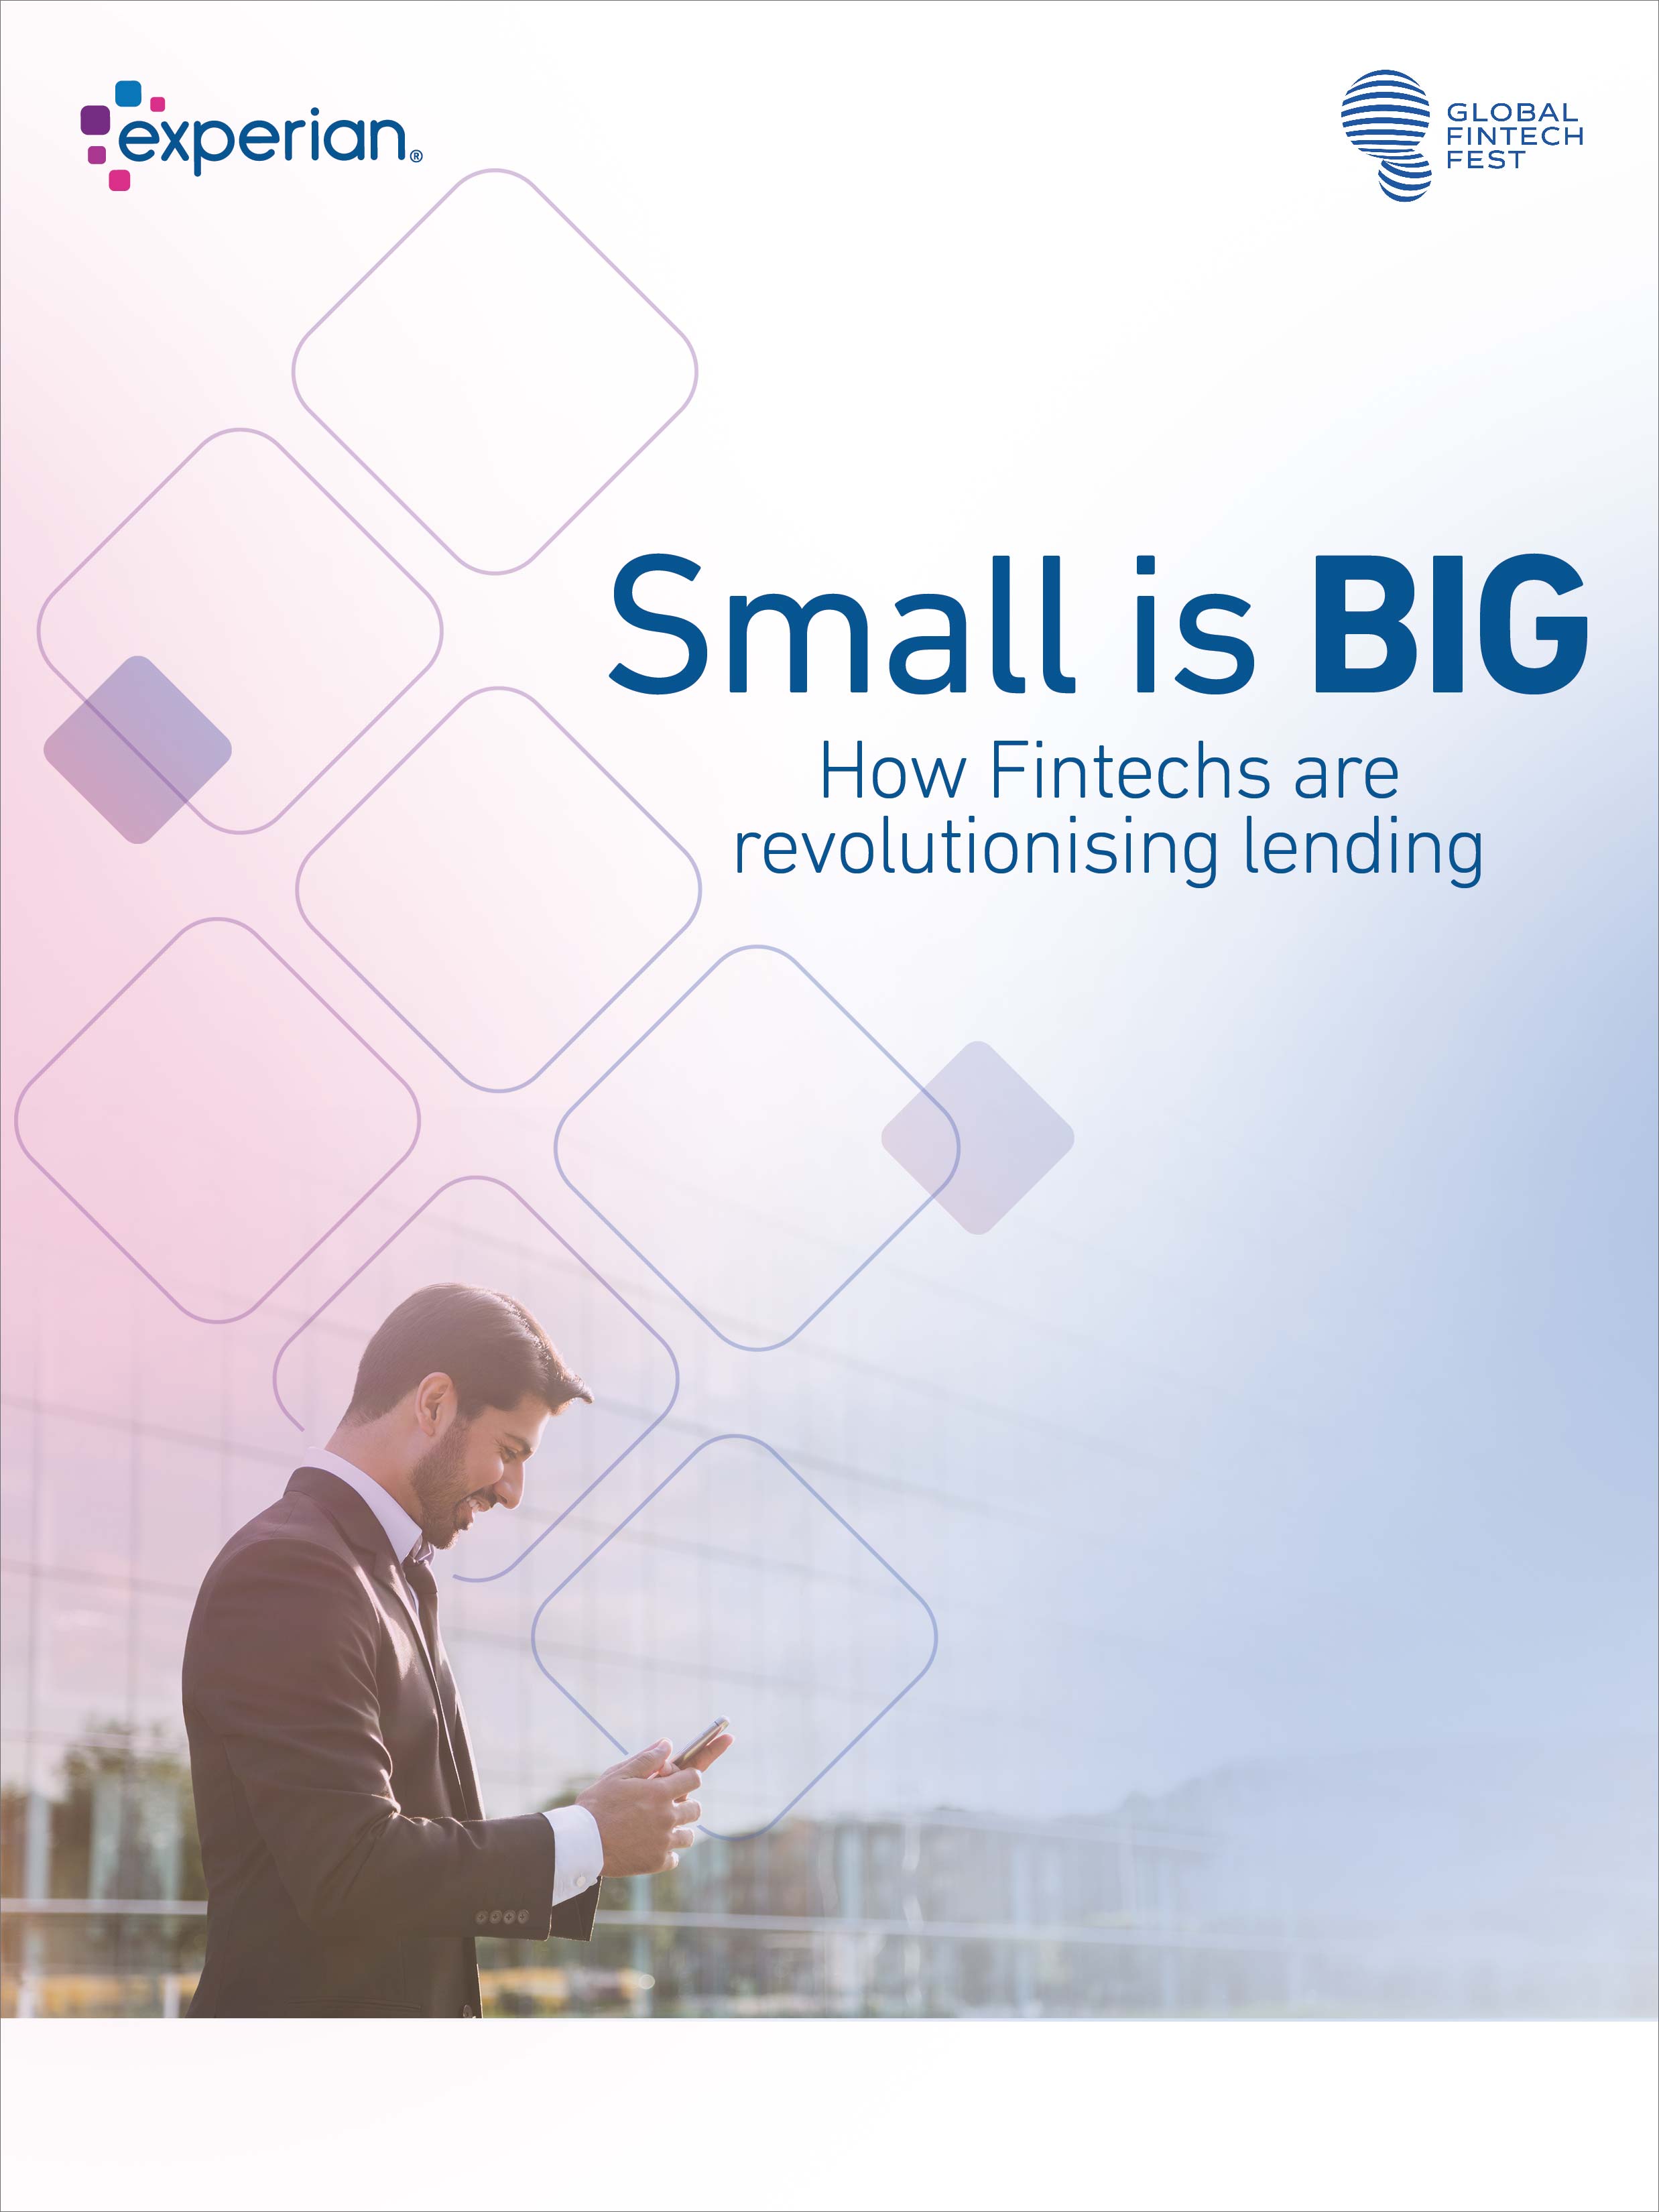 Small is Big: How Fintechs are revolutionising Lending